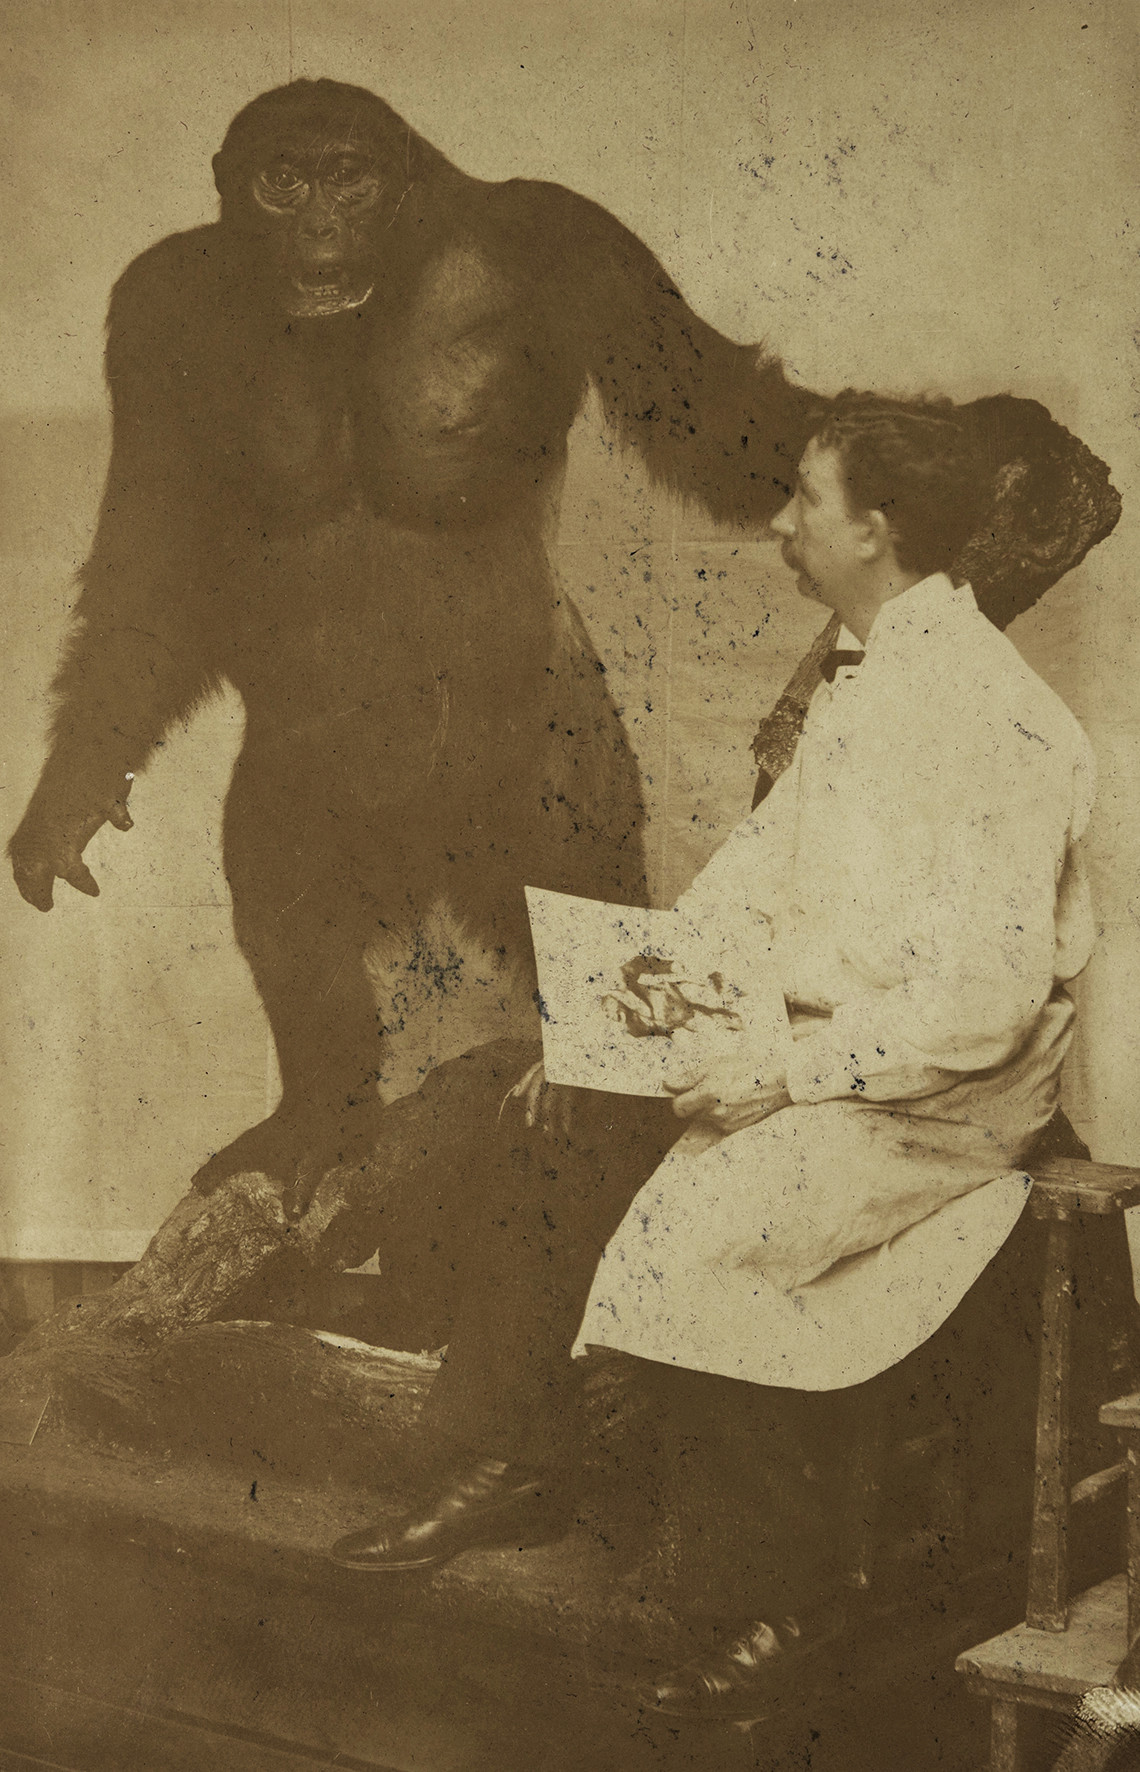 Sepia photograph of an upright gorilla taxidermy on the left, standing on two legs and on an artificial tree root. One of the animal’s arms is outstretched and leans on an artificial tree trunk. On the right, a man wearing a white lab coat and sitting on a kind of workshop bench with a drawing in his hand observes the gorilla beside him.